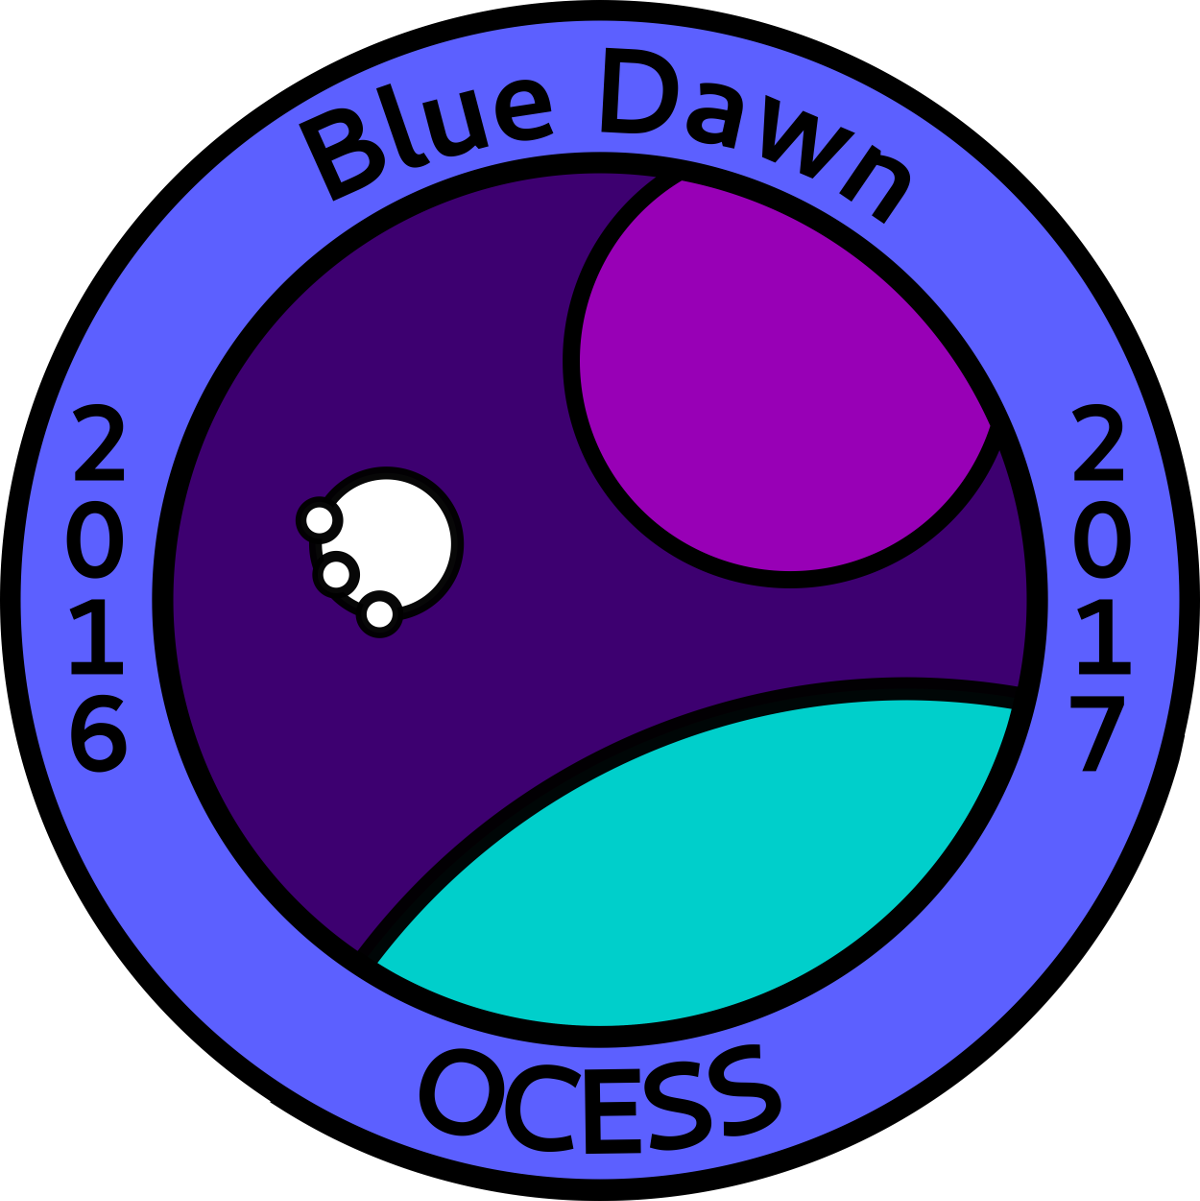 Bluedawn-patch-1200.png